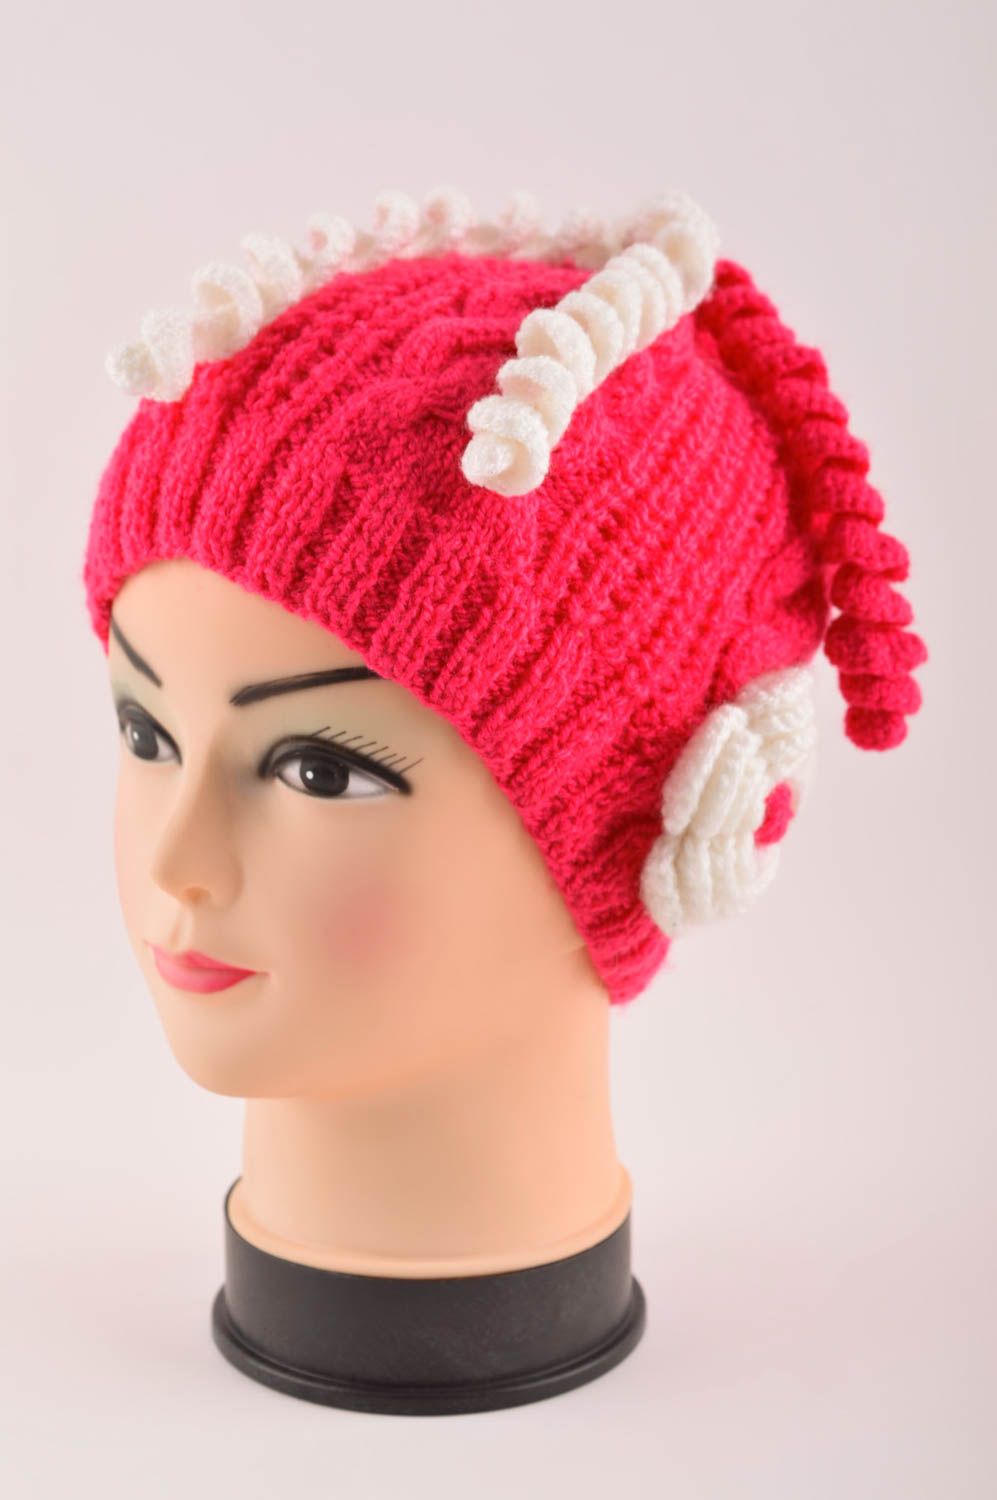 Handmade crocheted hat for babies red hat for girls stylish baby accessories photo 2